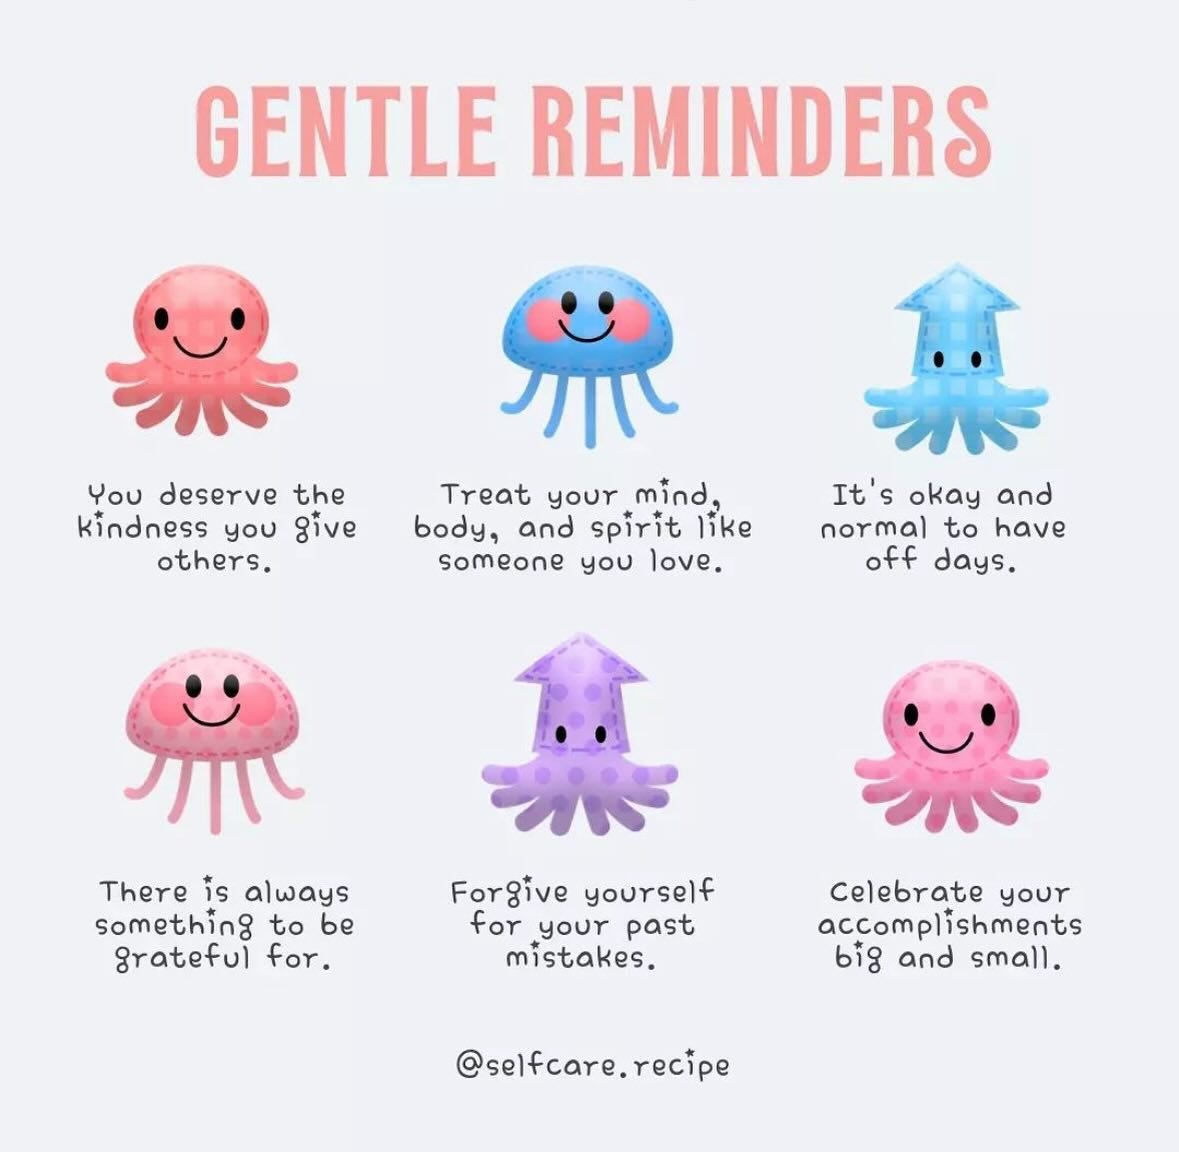 Reminders WE ALL can use! 🙌🏻

Thanks @selfcare.recipe for the adorable image! 🐙

#selfcare #bekindtoyourself #celebrateyourself #gratitude #lifecoachingtips #bloomwithbeccoaching